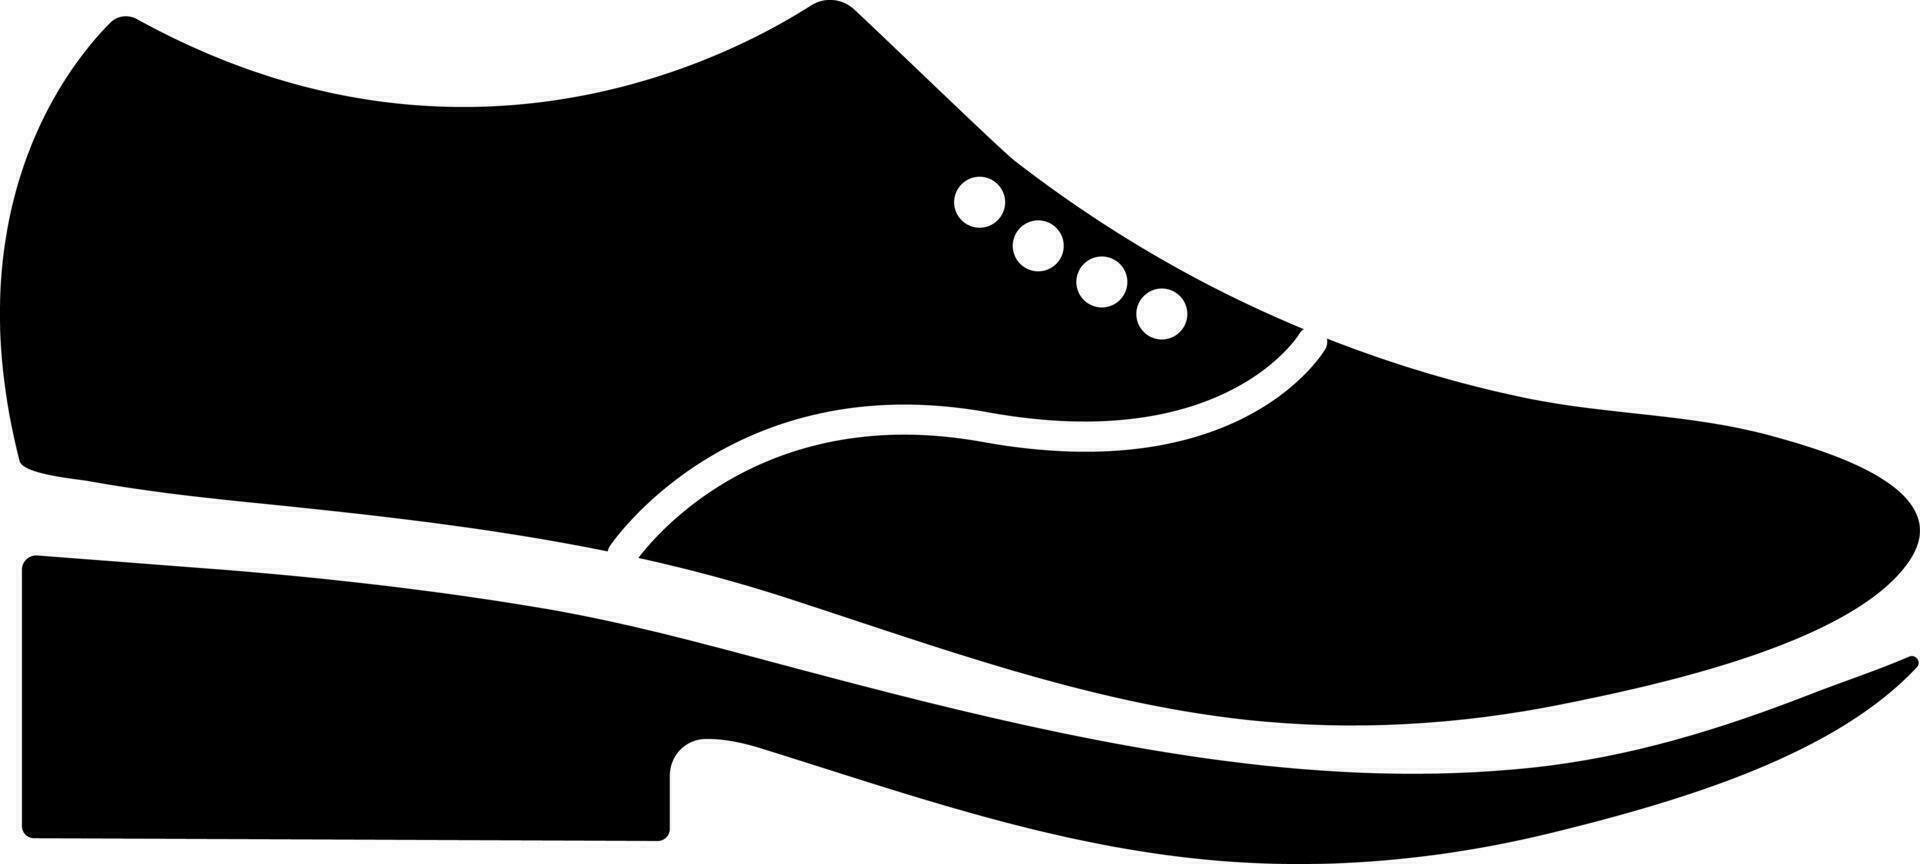 shoes icon in flat style. vector